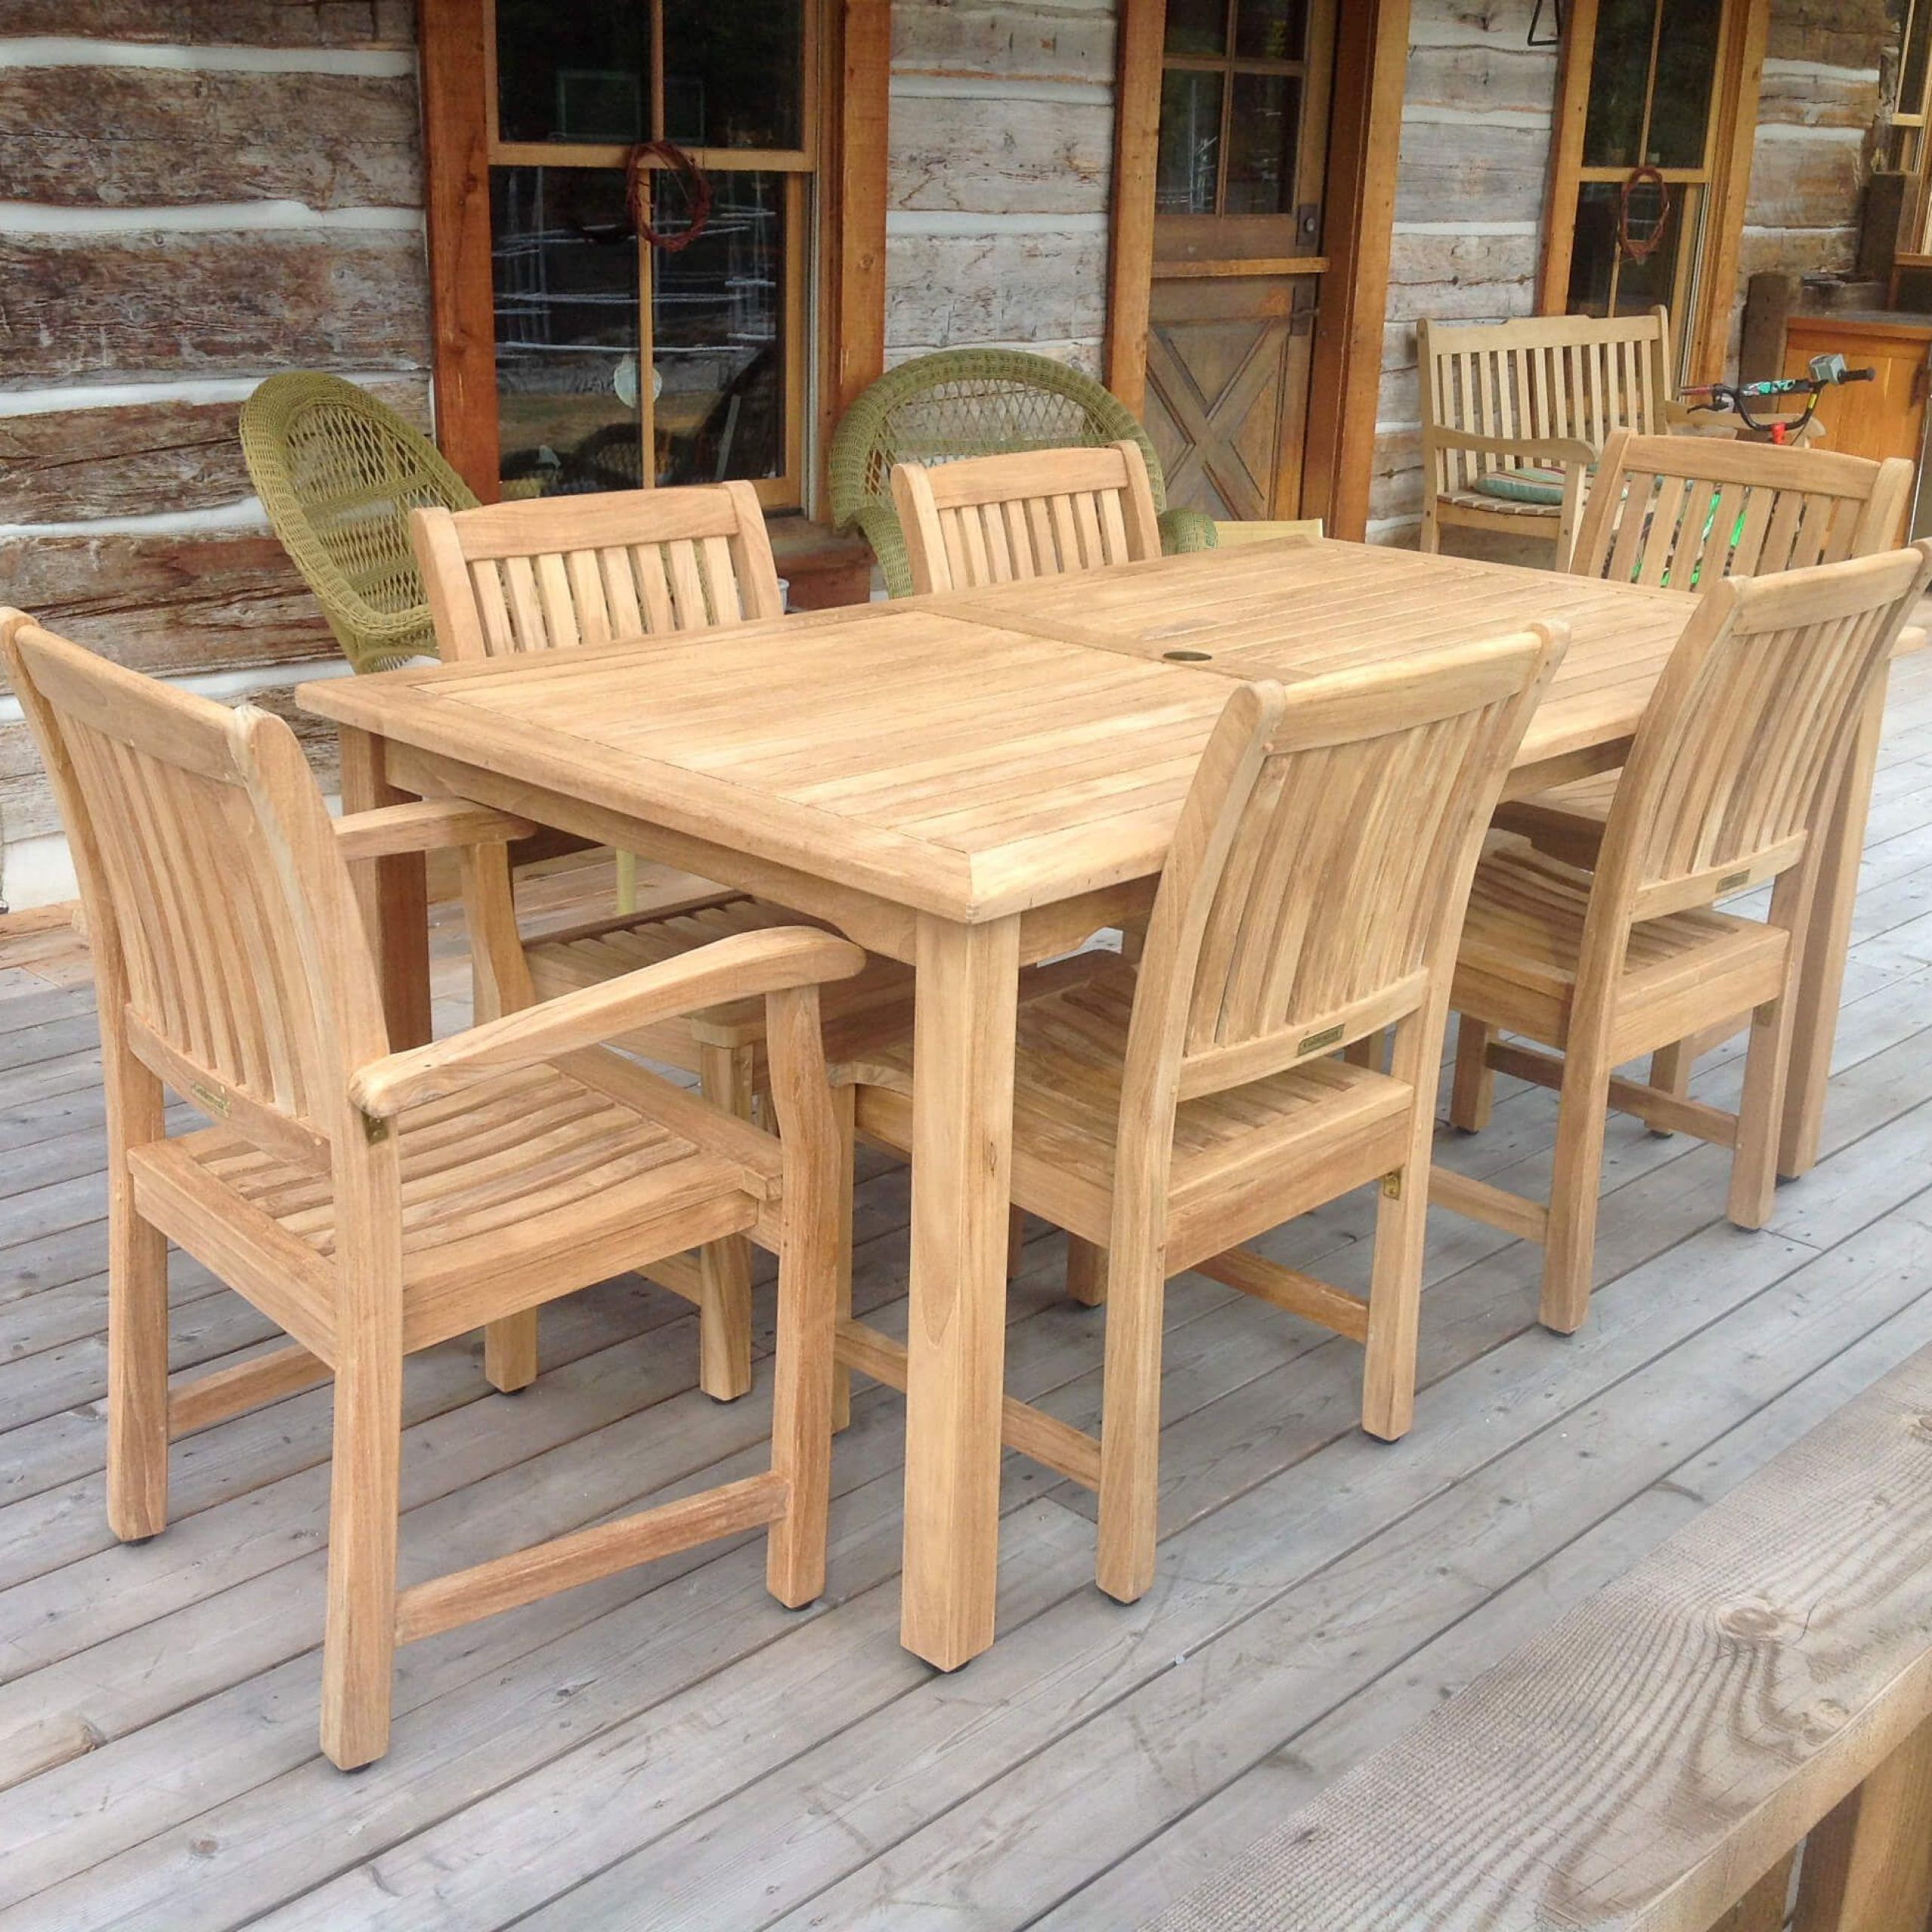 Teak Patio Dining Set For 6 Rectangular Table And 6 Teak Chairs With Regard To Teak Wood Rectangular Patio Dining Sets (View 1 of 15)